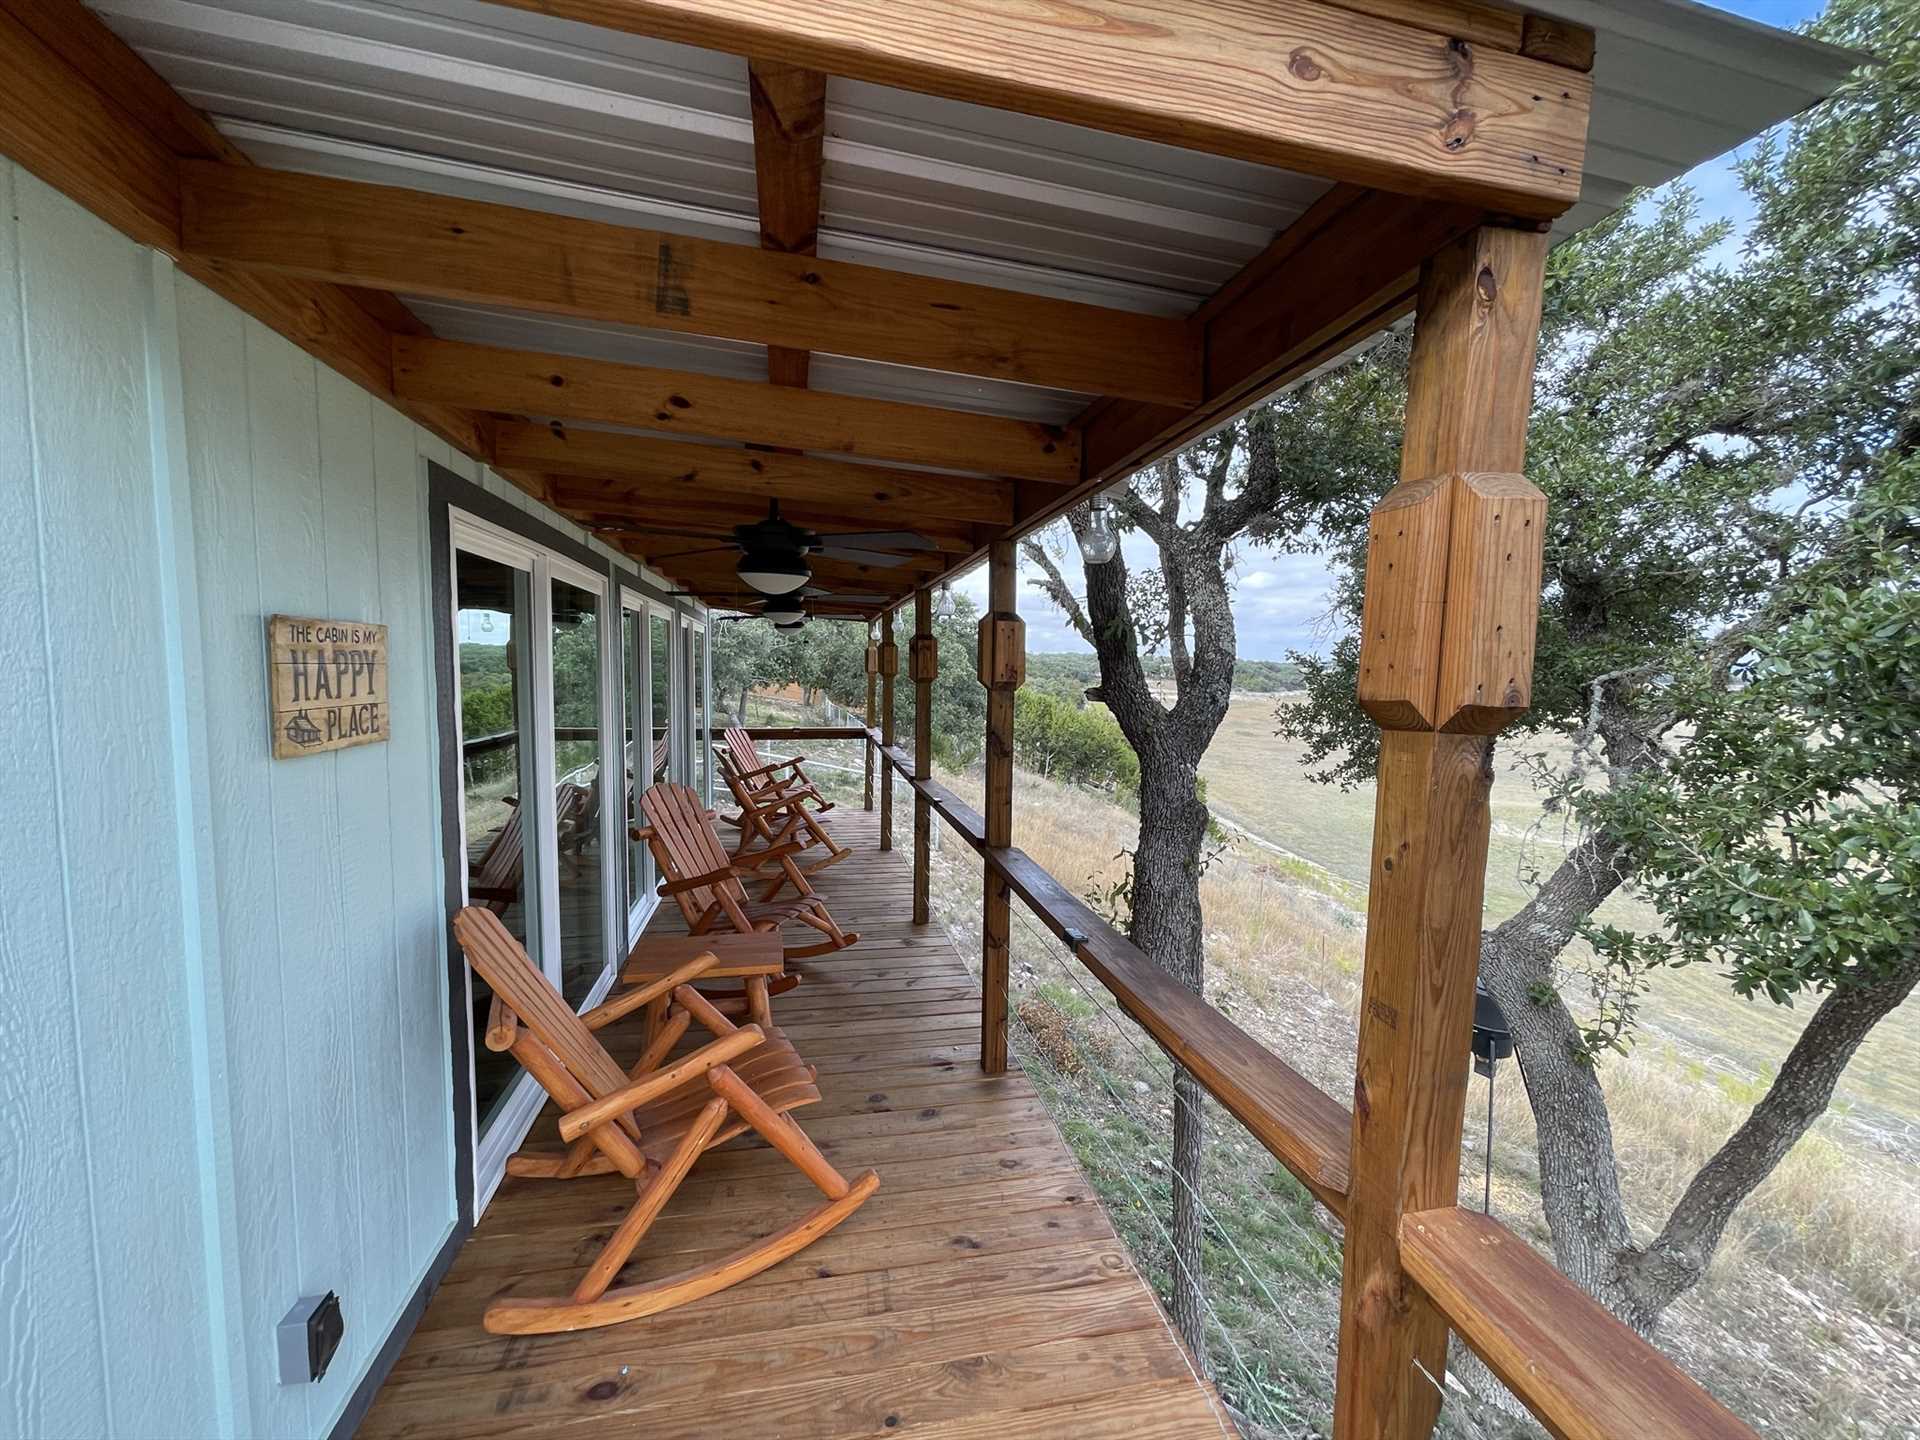                                                 Sip your morning coffee, or enjoy a glass of wine in the evening, on the covered deck! Ceiling fans add that classy touch of comfort as you enjoy the Hill Country scenery.